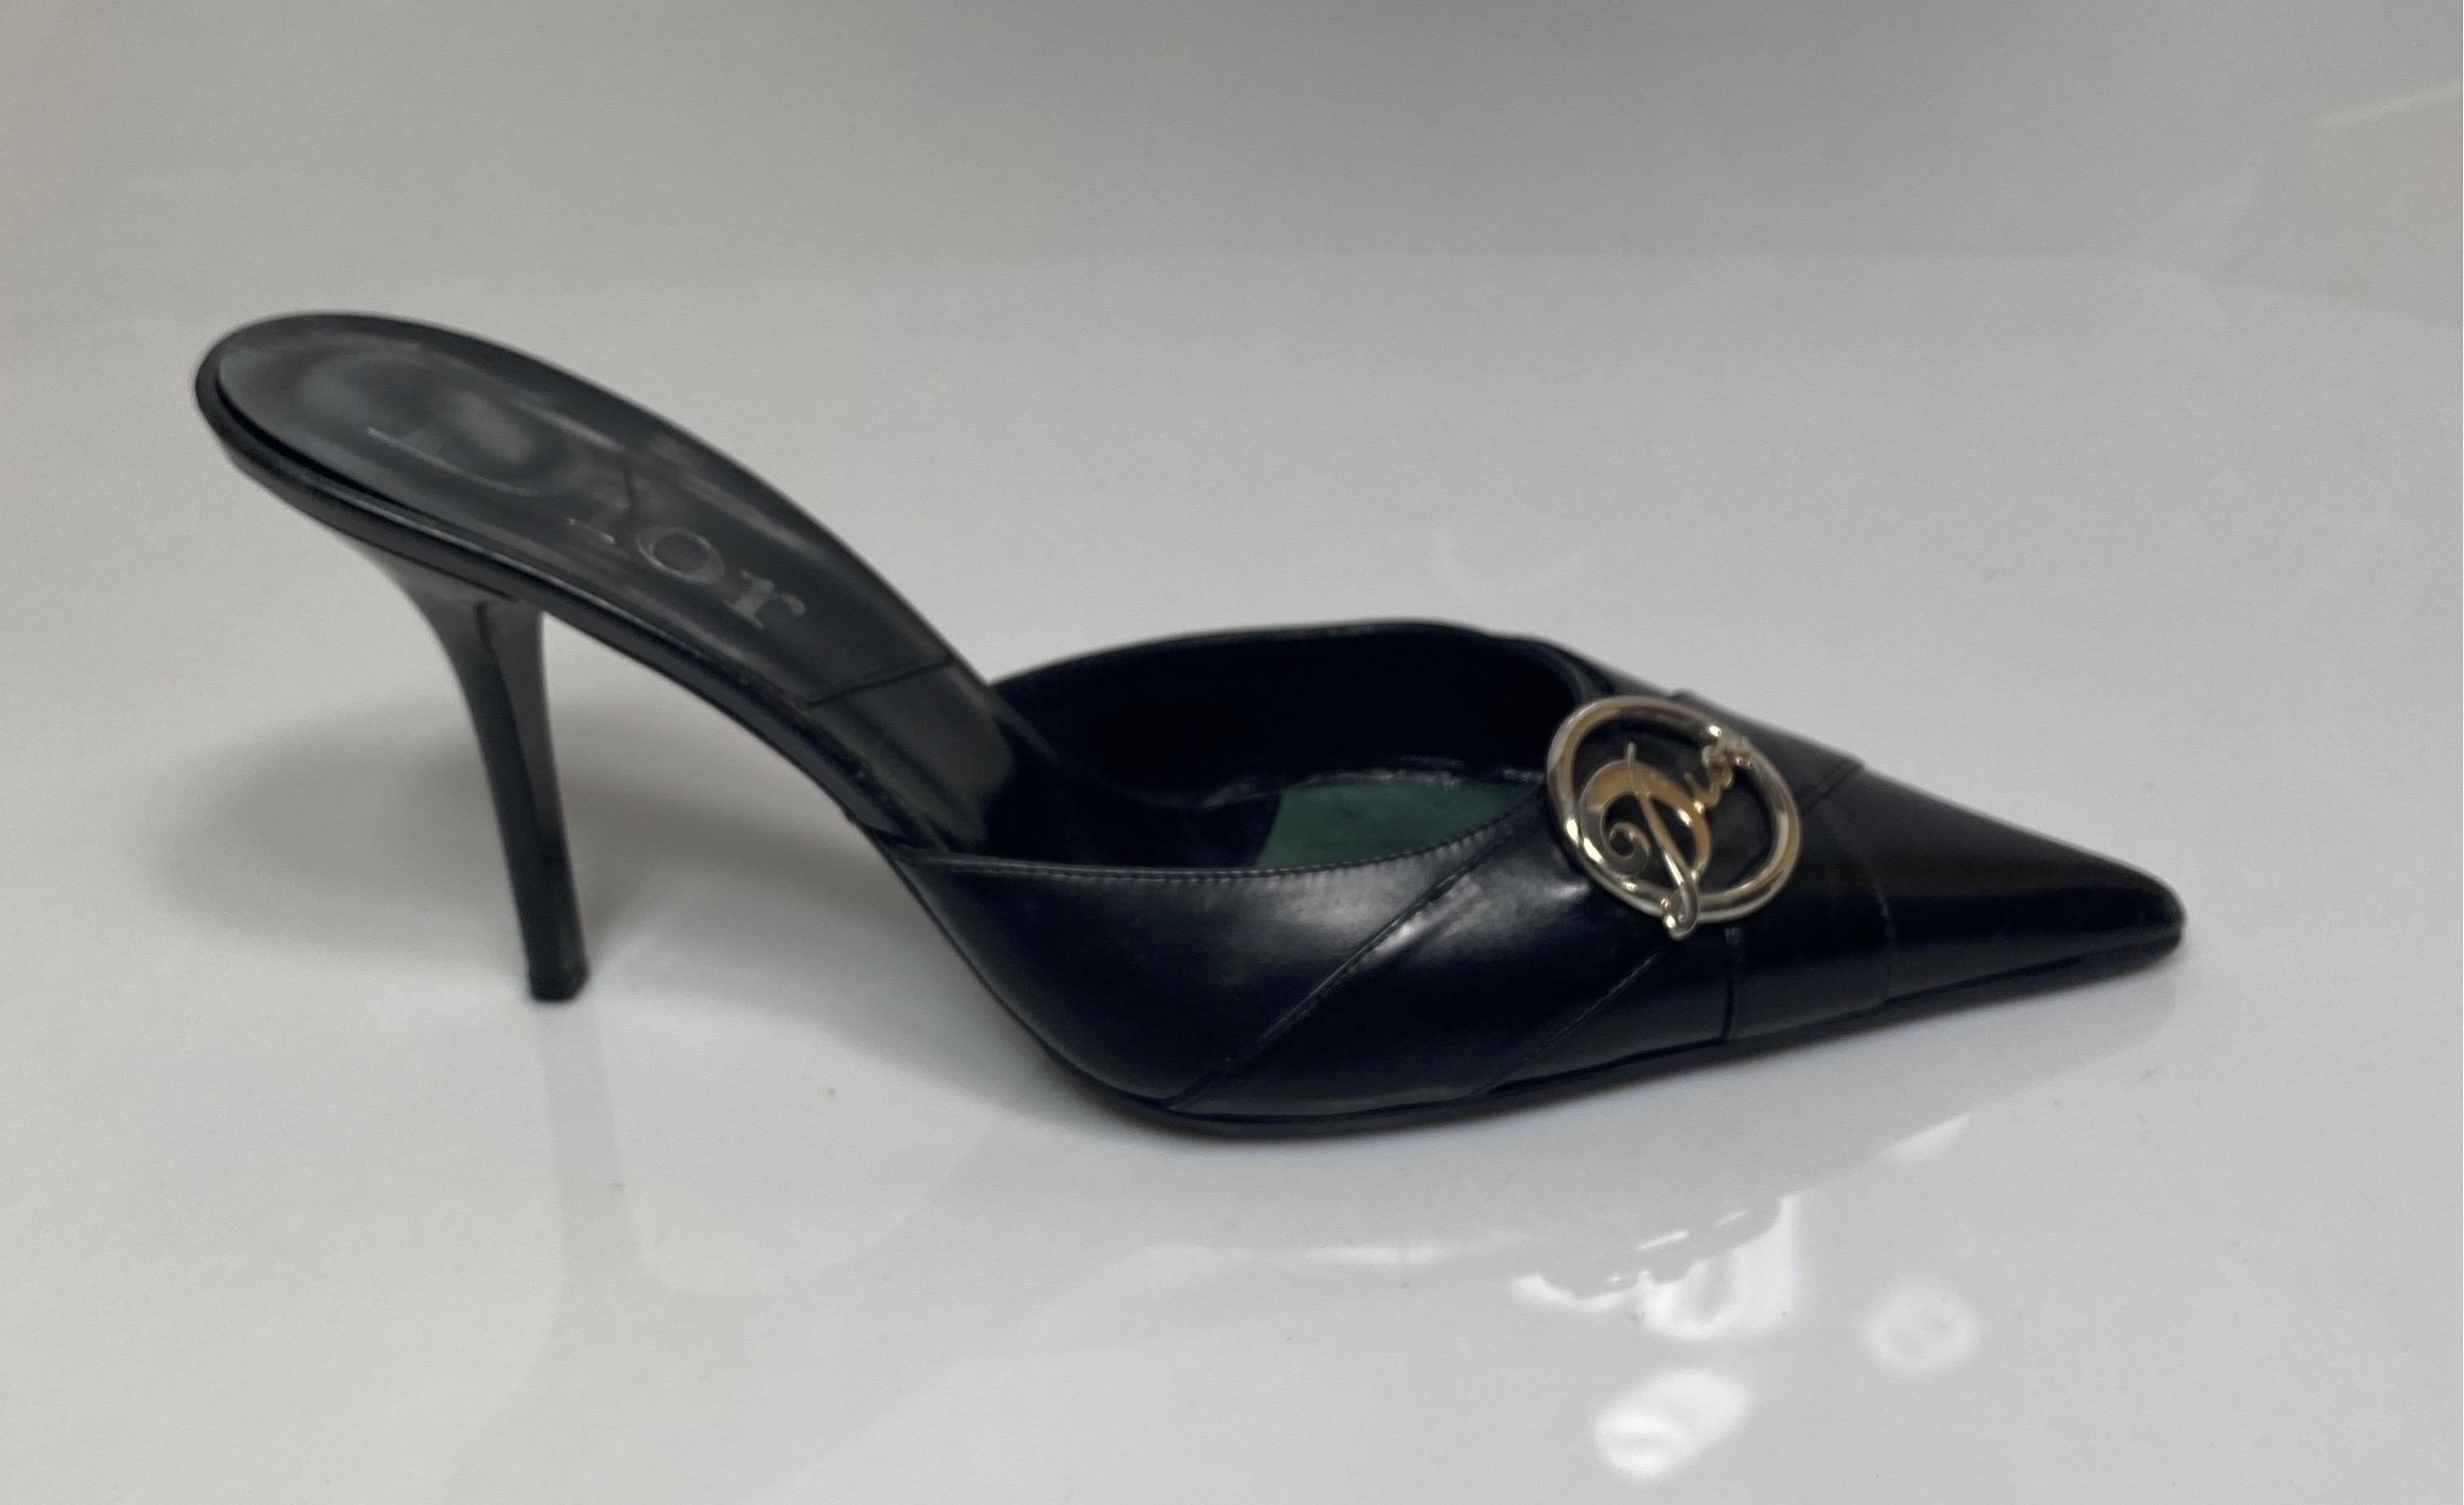 Christian Dior Early 2000’s Vintage Black Leather High Heel Slide - Size 39. These Dior pointy toe slides are as described:
4” high patent leather heel
2 - 1” leather band detail in front
1.5” wide round Dior Metal Logo detail on banding
Very good